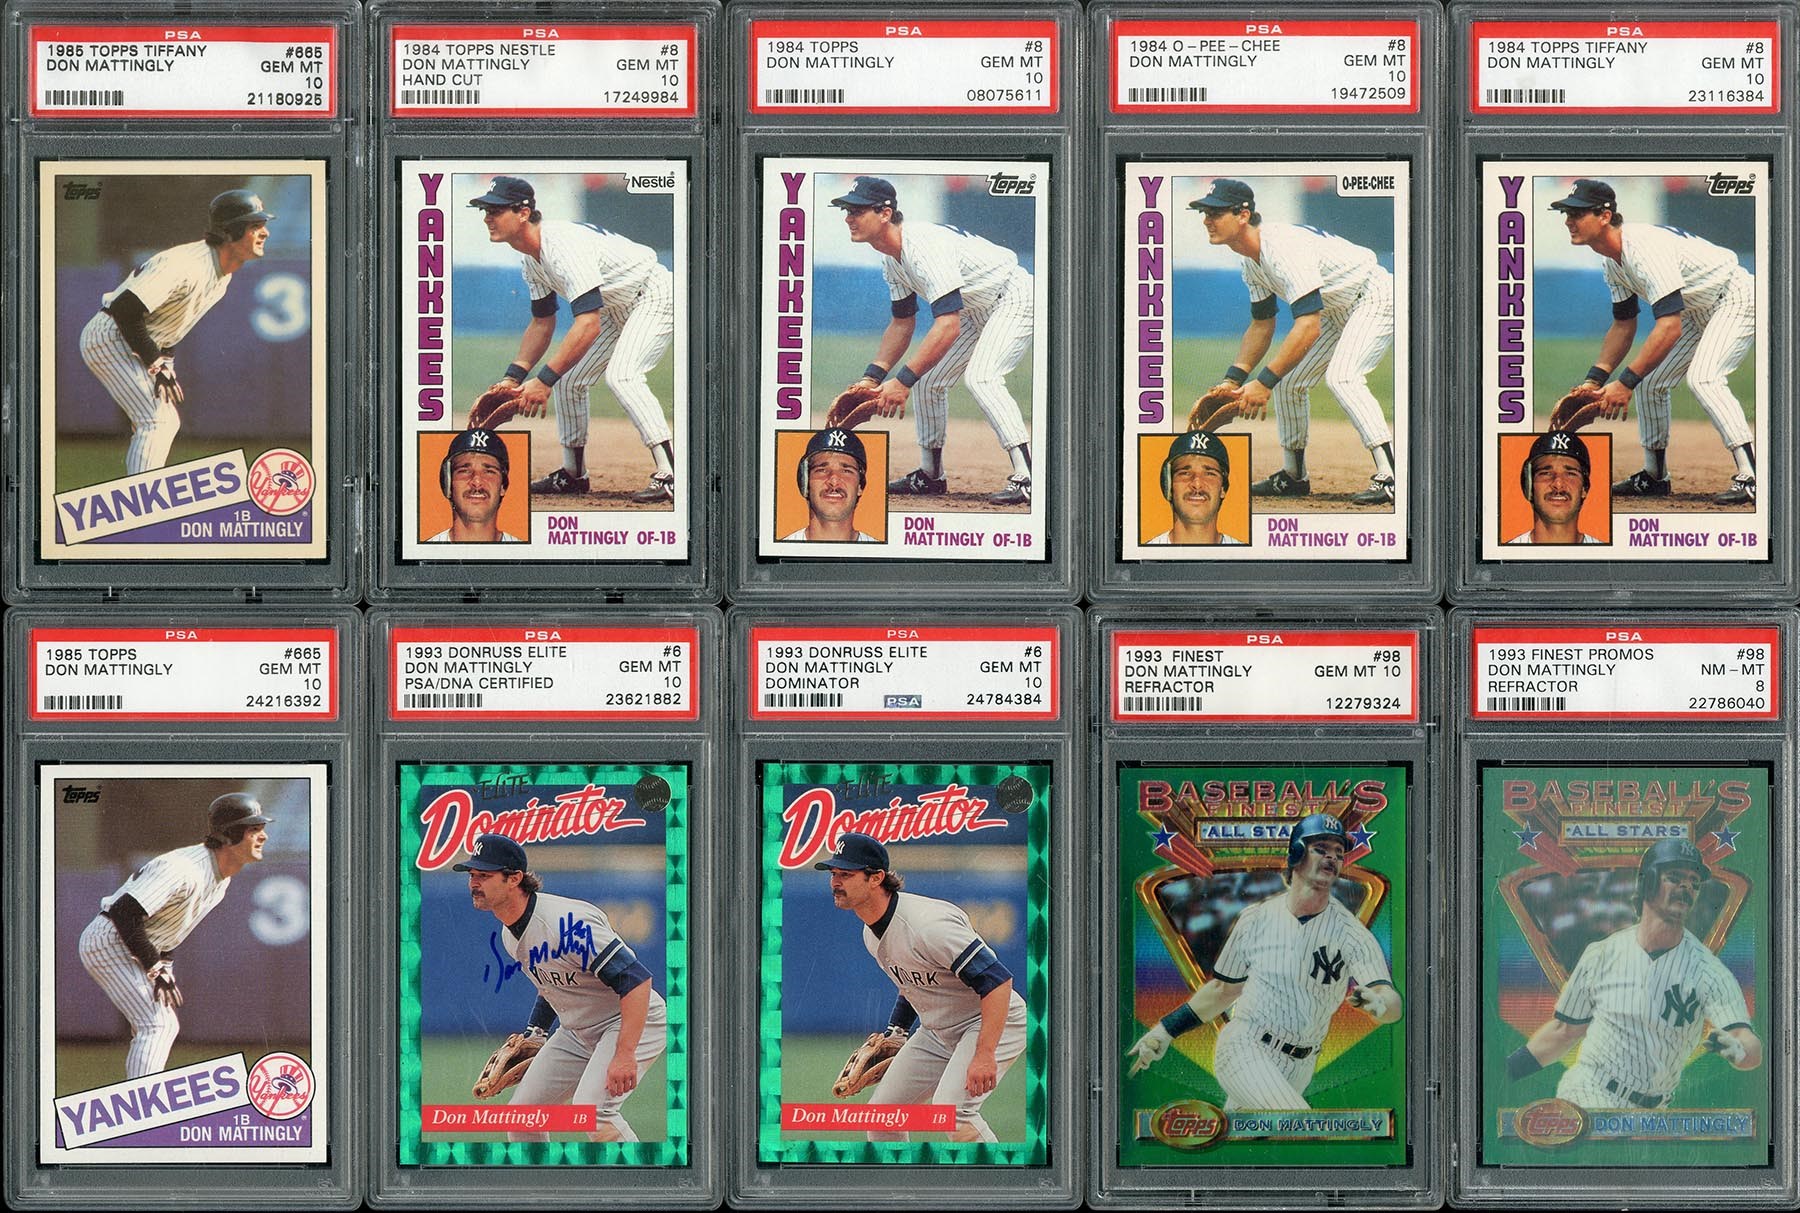 Baseball and Trading Cards - The Ultimate Don Mattingly Award-Winning Master Collection - #1 on PSA Registry (1,503 Cards, 9.61 GPA)